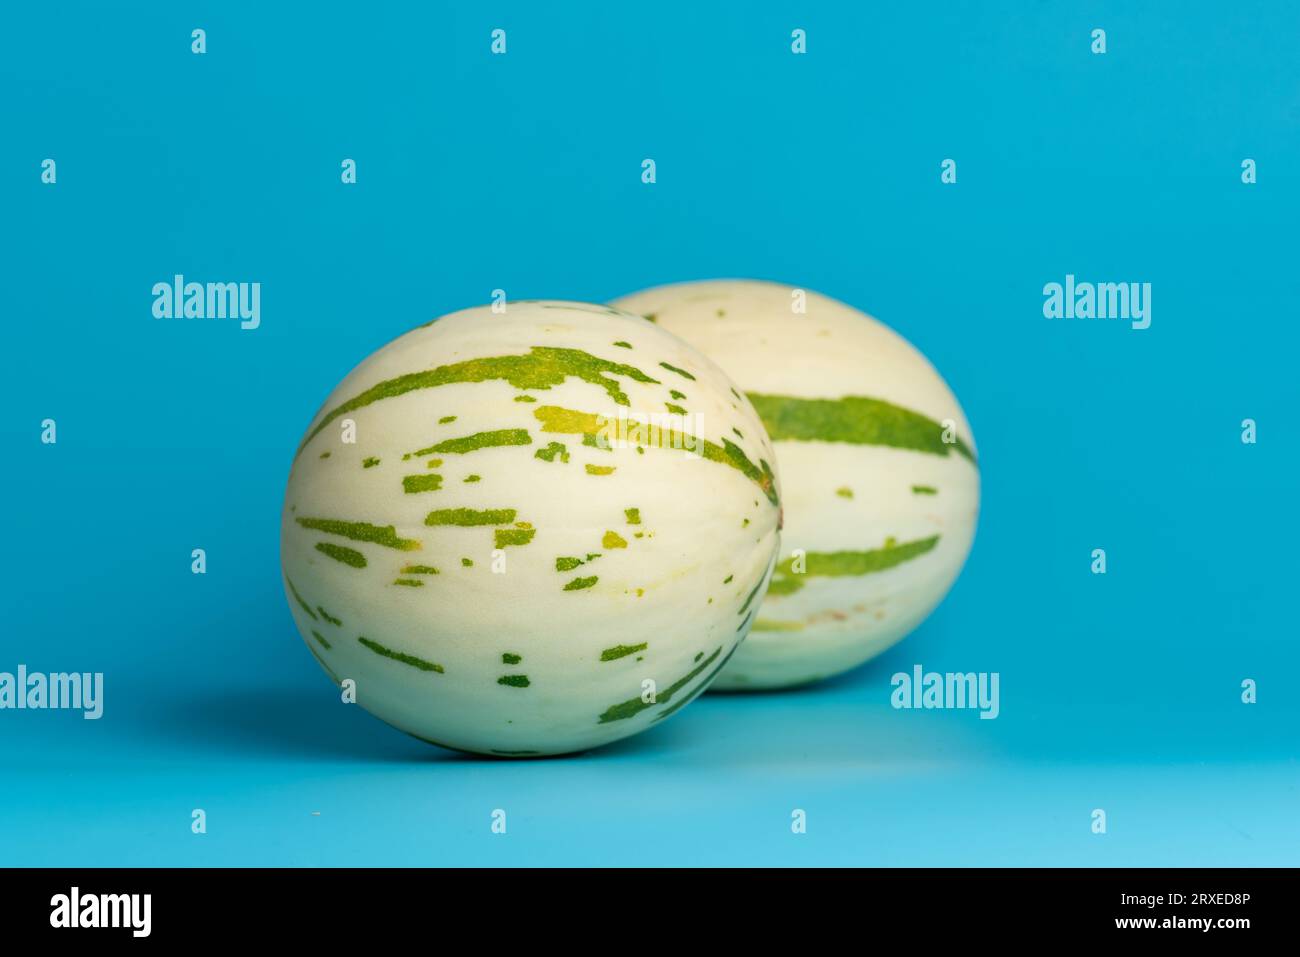 Ivory gaya melon with green dotted stripes and spots on a blue background. Colorful ripe juicy and soft fruit, sweet taste with floral notes Stock Photo